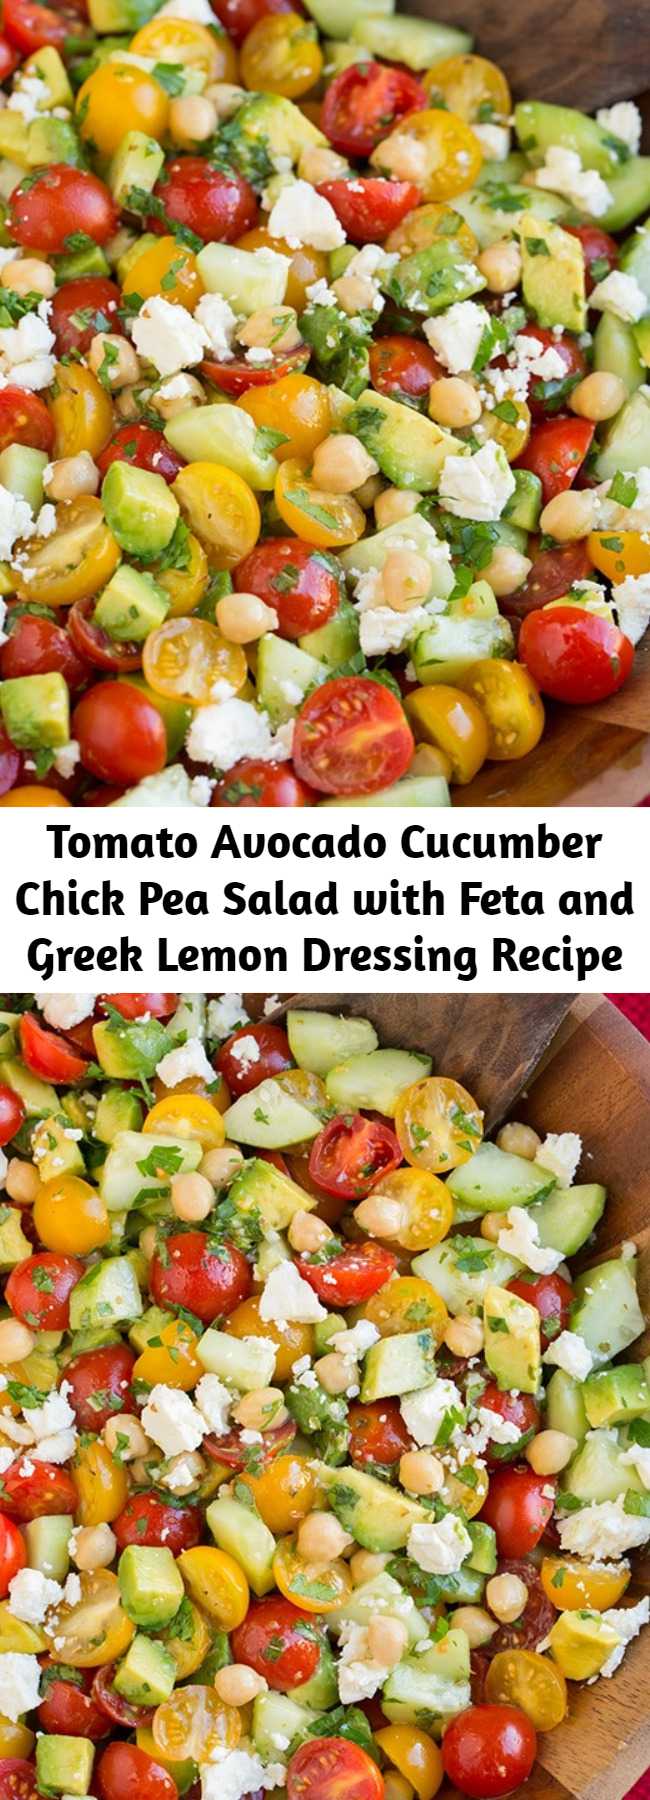 Tomato Avocado Cucumber Chick Pea Salad with Feta and Greek Lemon Dressing Recipe - Healthy flavorful Greek inspired salad. Made with lots of fresh vegetables, chick peas, feta and bright lemon dressing. It's a perfect summer side dish.